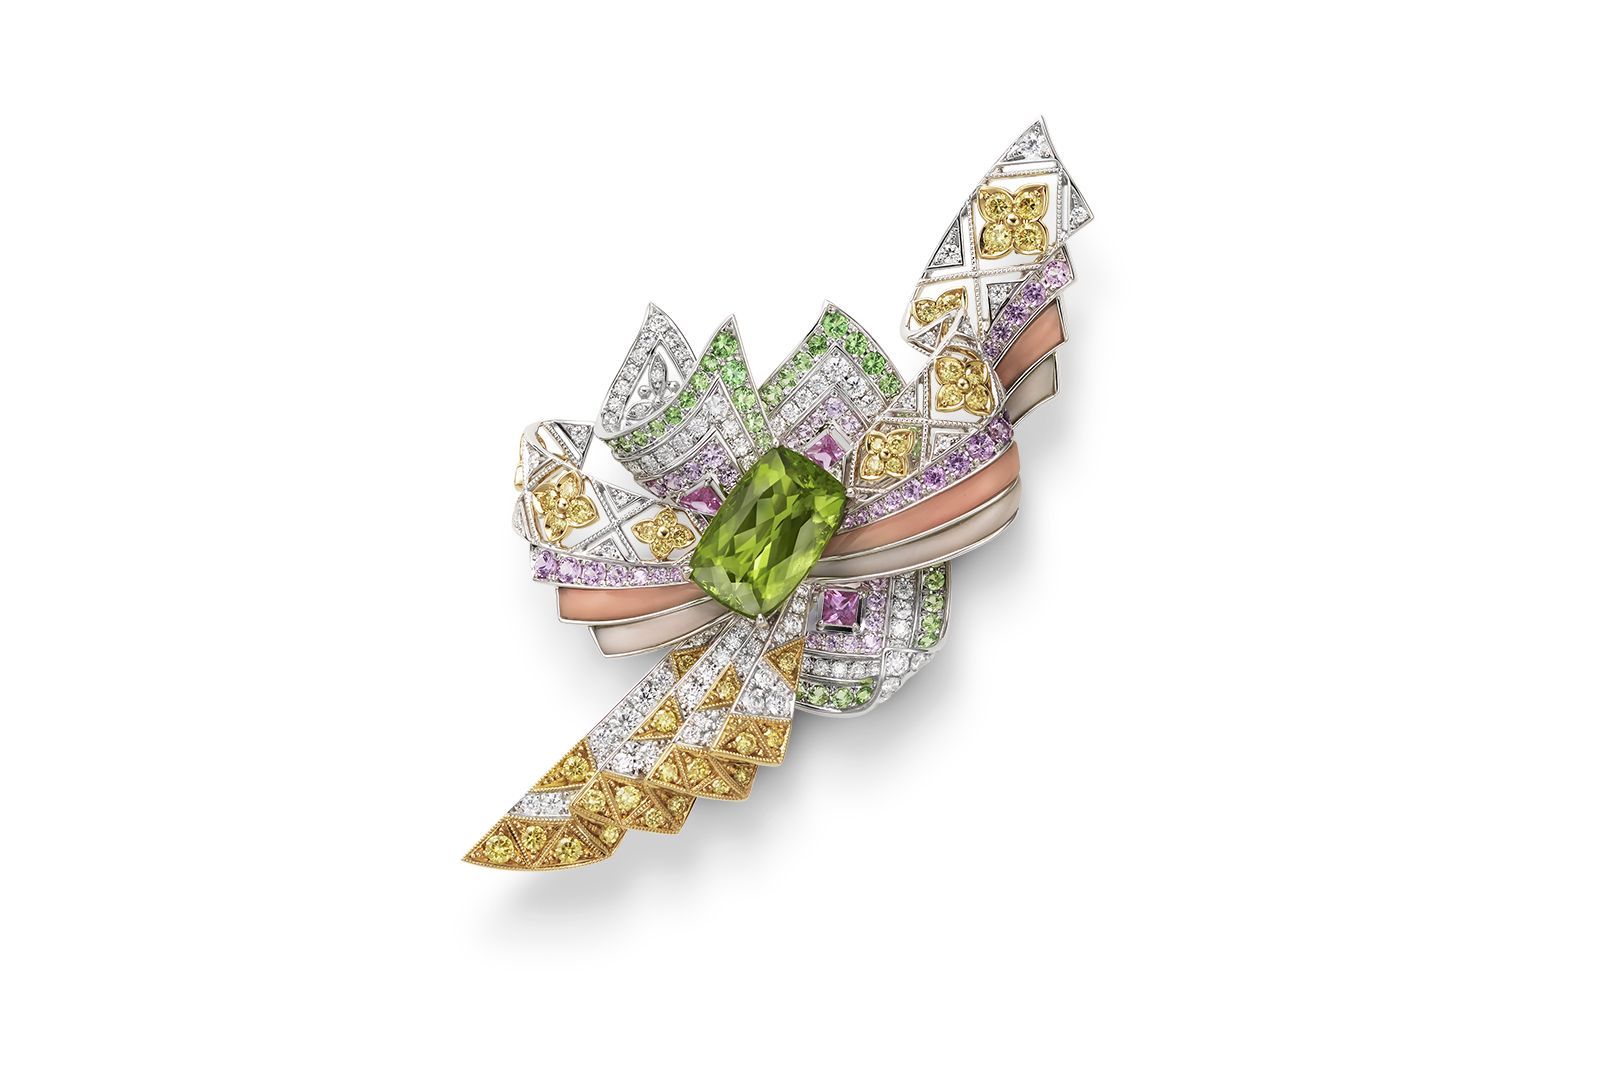 Mikimoto ‘The Japanese Sense of Beauty’ High Jewellery Collection brooch with a cushion-cut peridot, surrounded by sapphire, garnet, diamond and coral